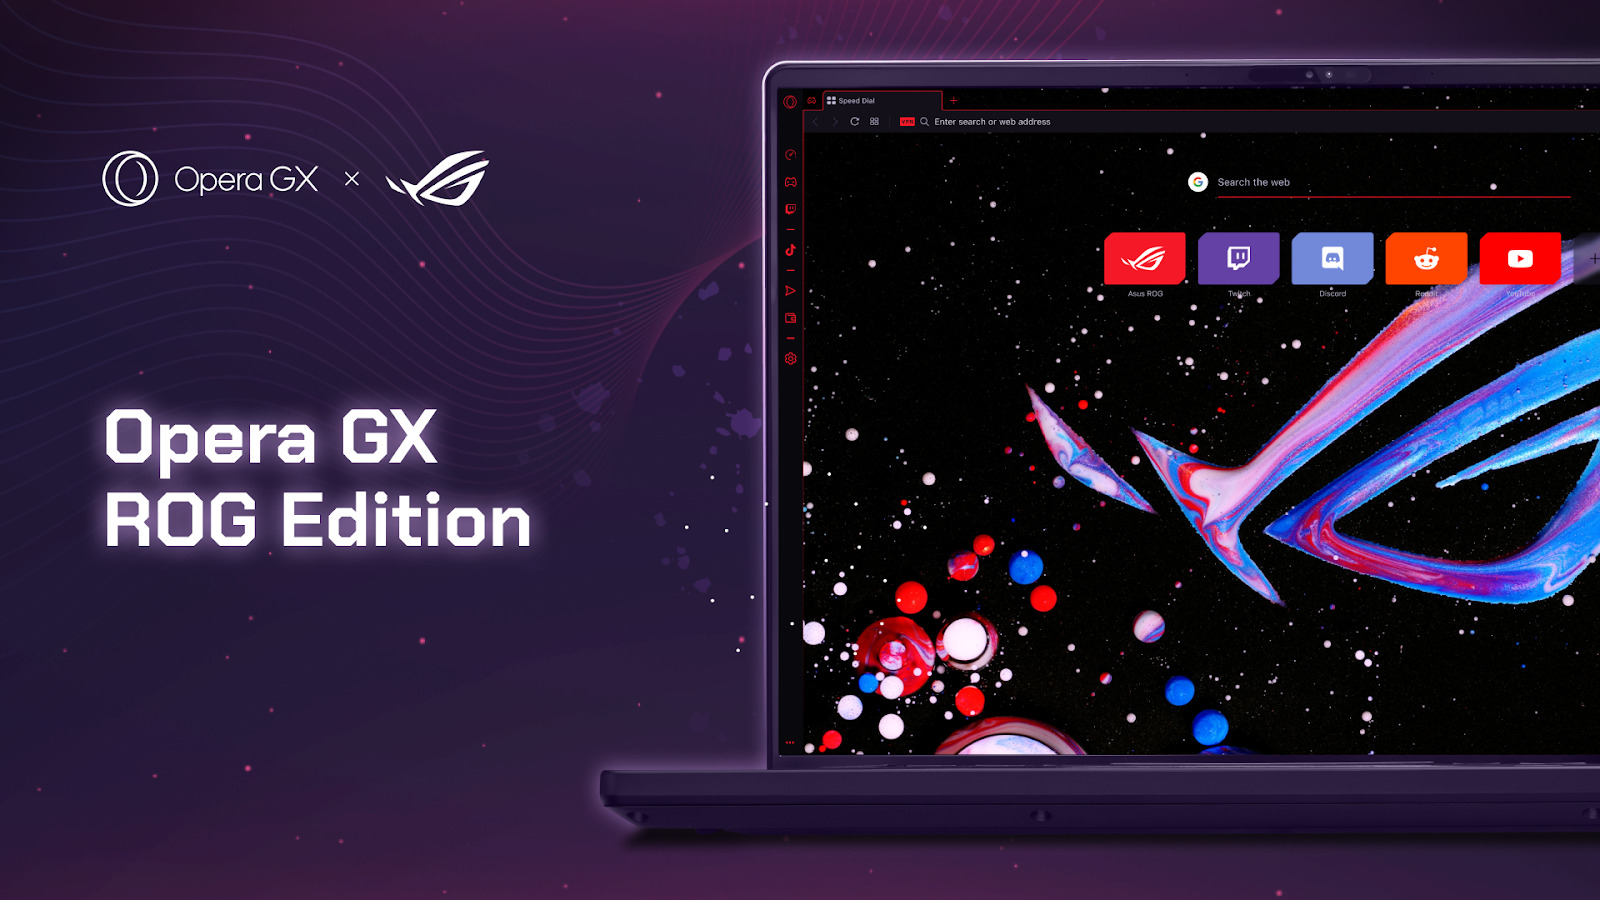 A laptop displays Opera GX's new ROG edition, in partnership with ASUS.